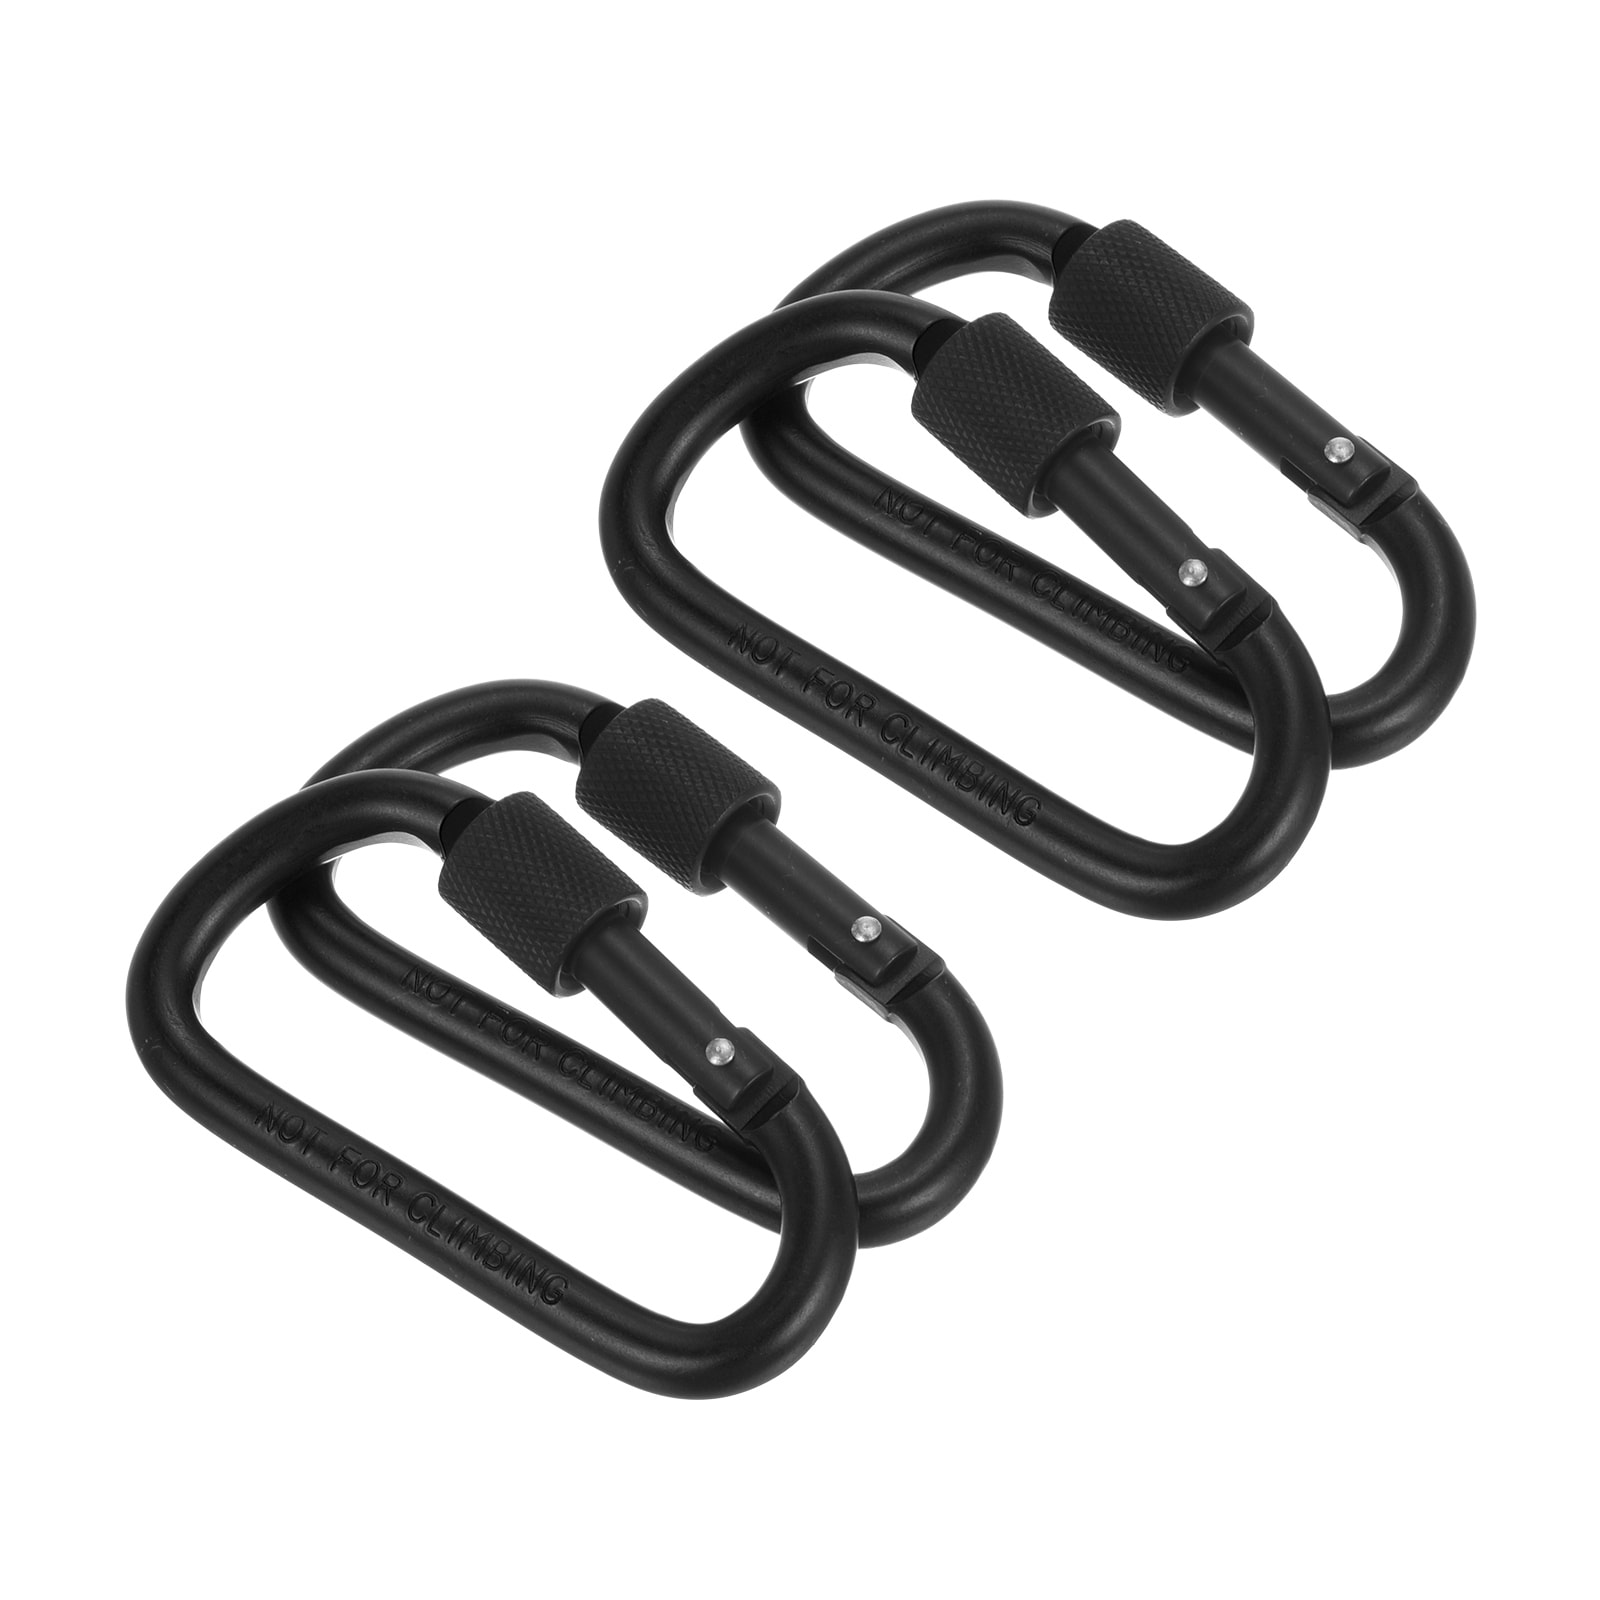 4pcs Double Small Carabiner Clips, S-shaped Carabiner, Keychain